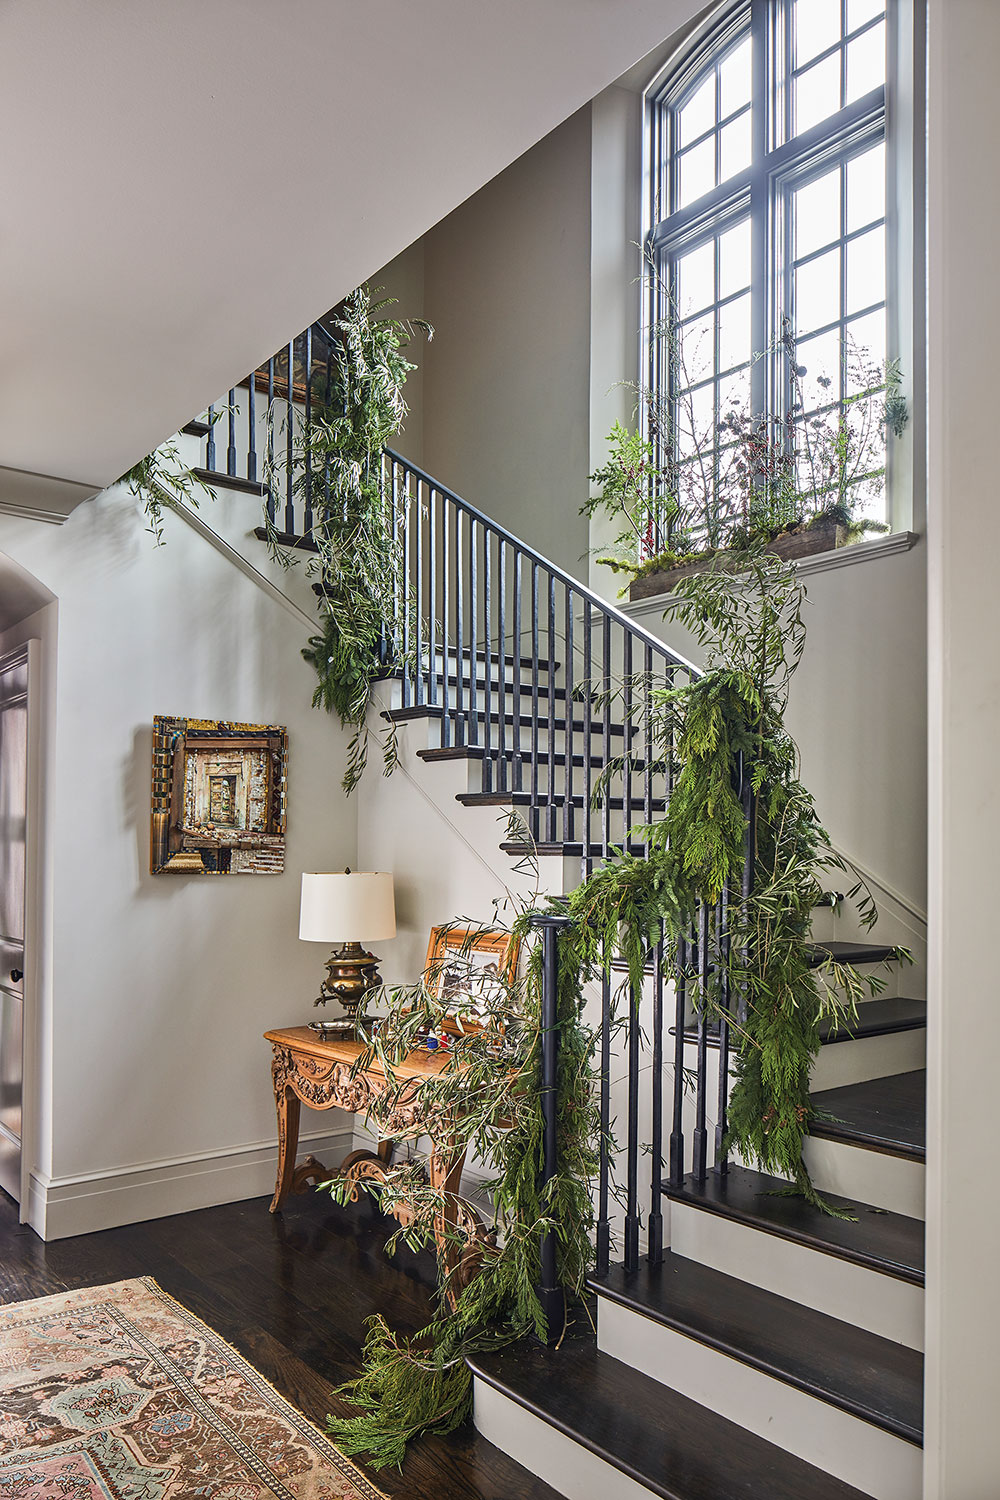 stair rail decked in greenery